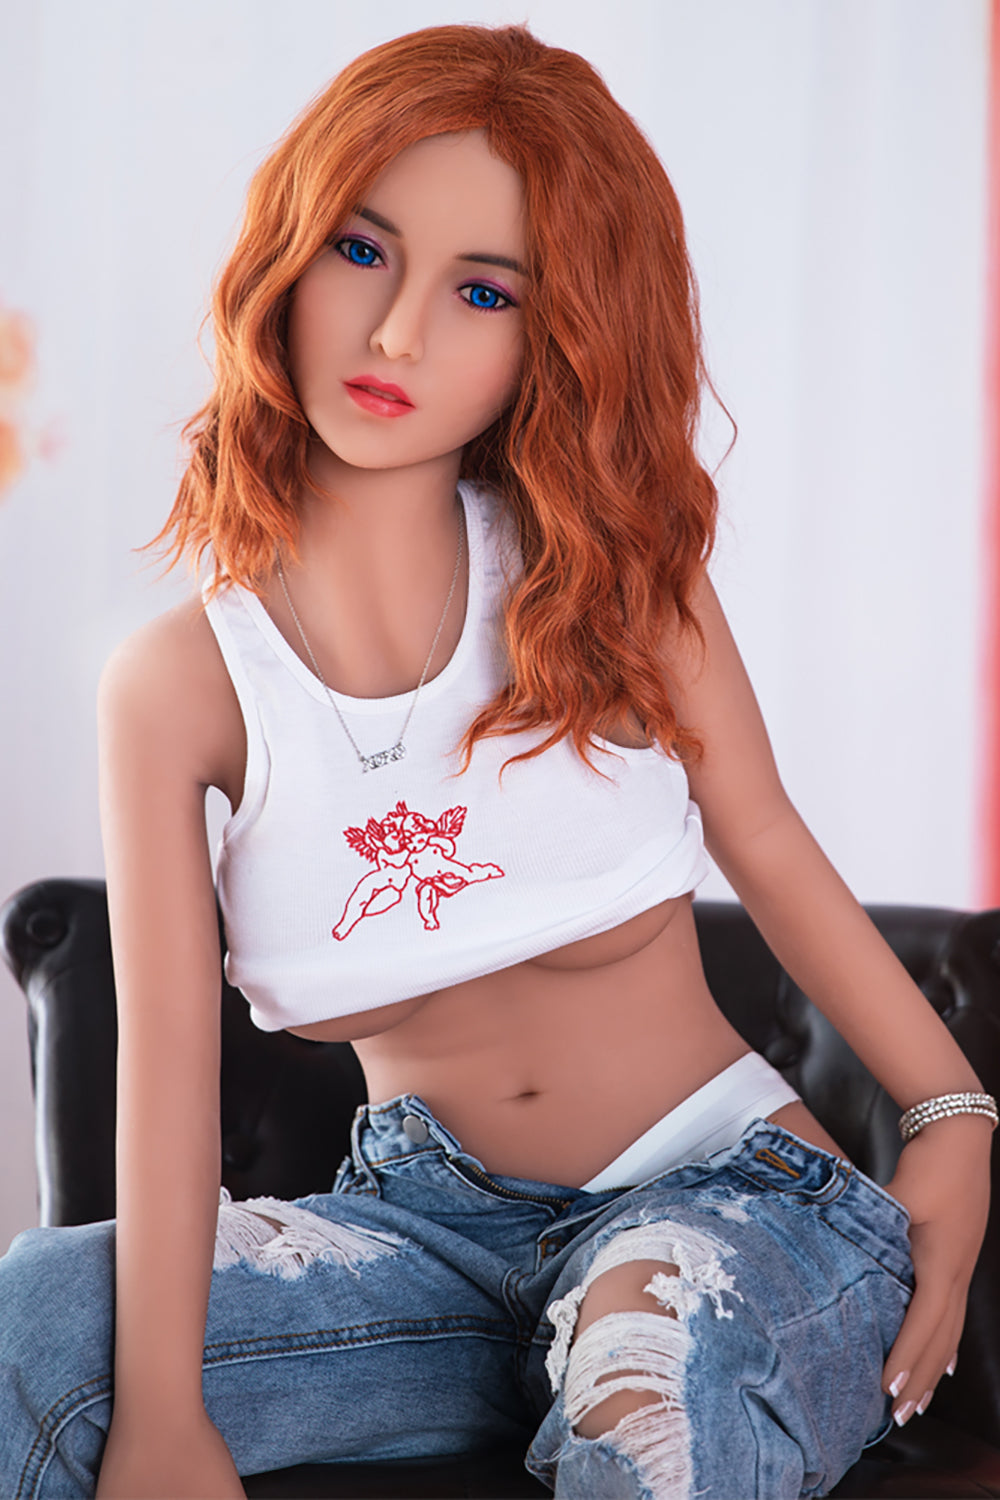 EU Stock - Haven 150cm 187# Head Nature Skin Sexy Real Love Doll TPE Sex Doll